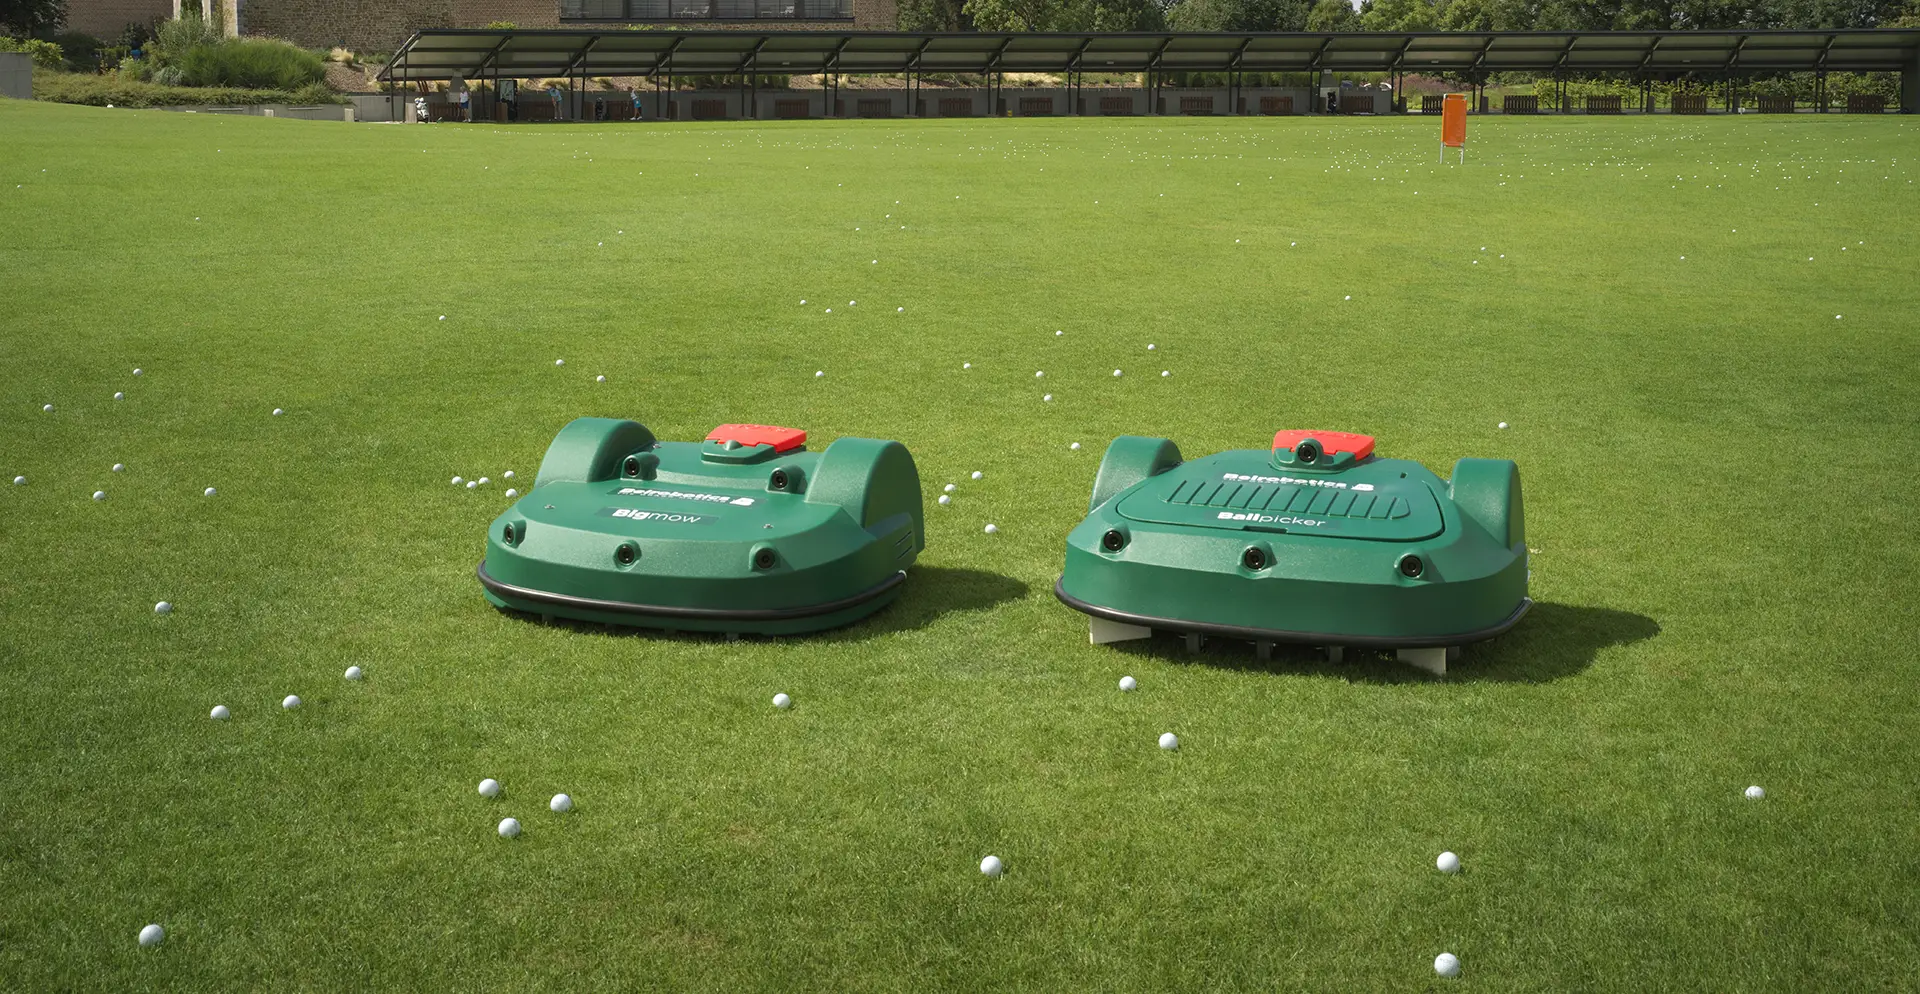 Robot golf course mowers and ball pickers: why you should automate your course as much as possible